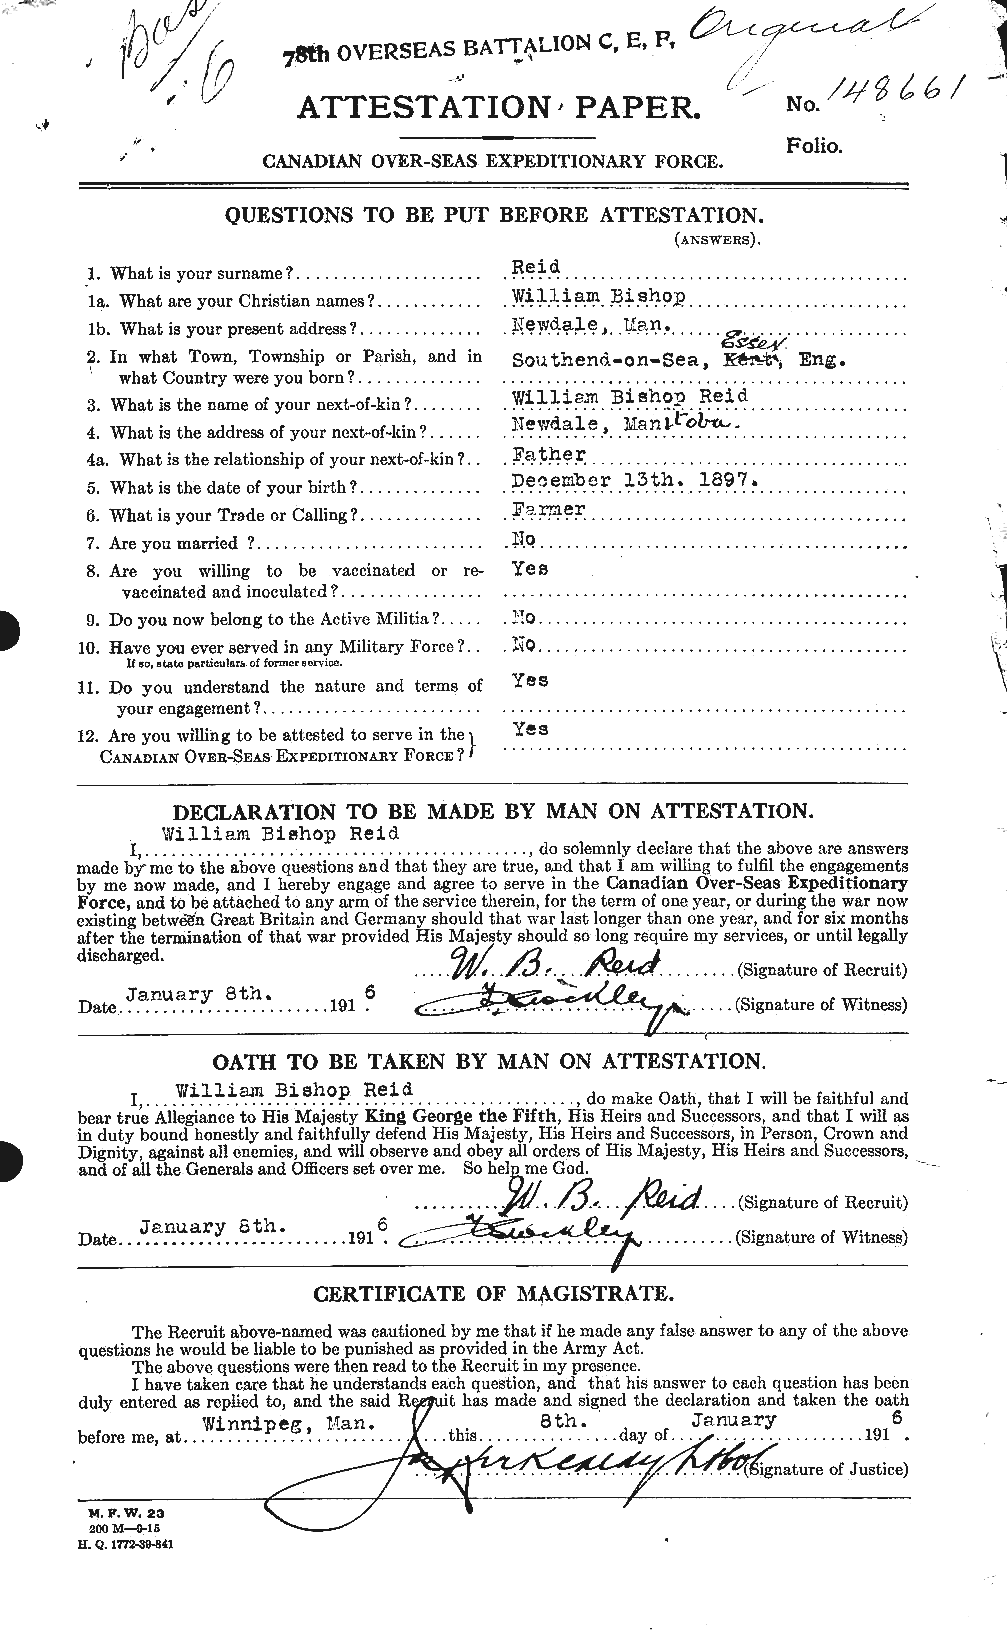 Personnel Records of the First World War - CEF 596964a